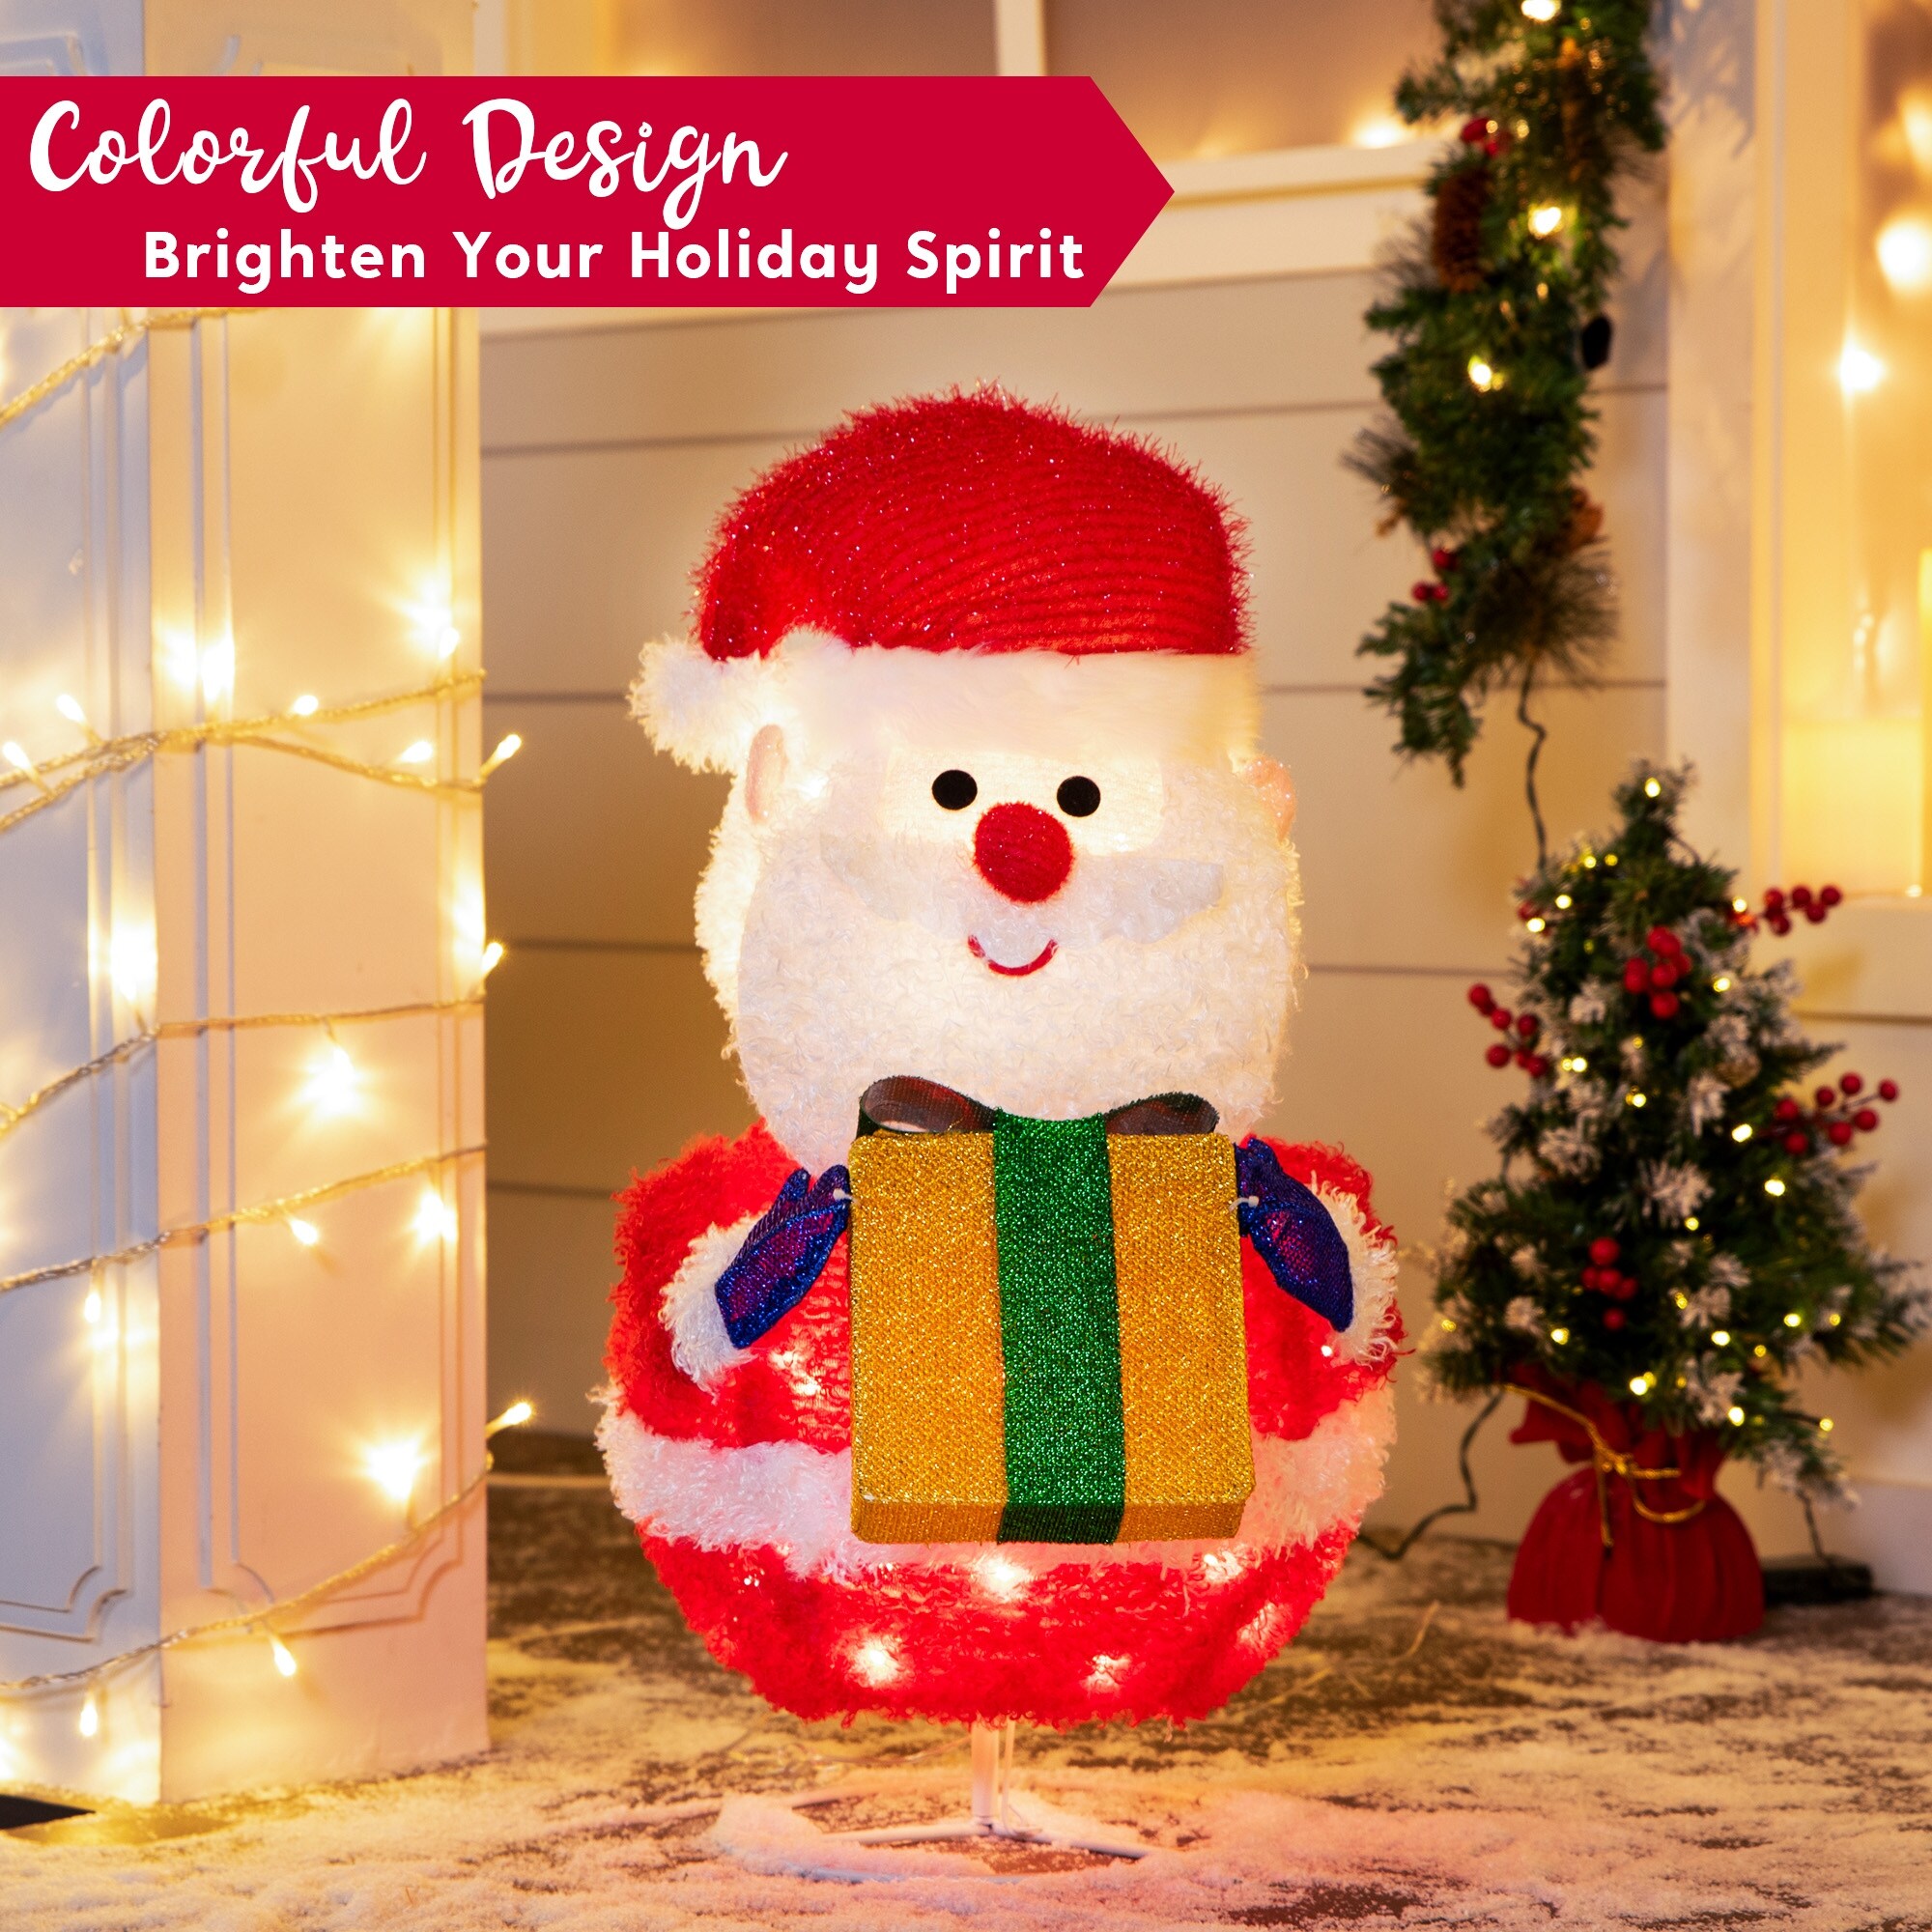 Joiedomi's 2 FT Tall Multicolor Metal and Fabric Collapsible Santa